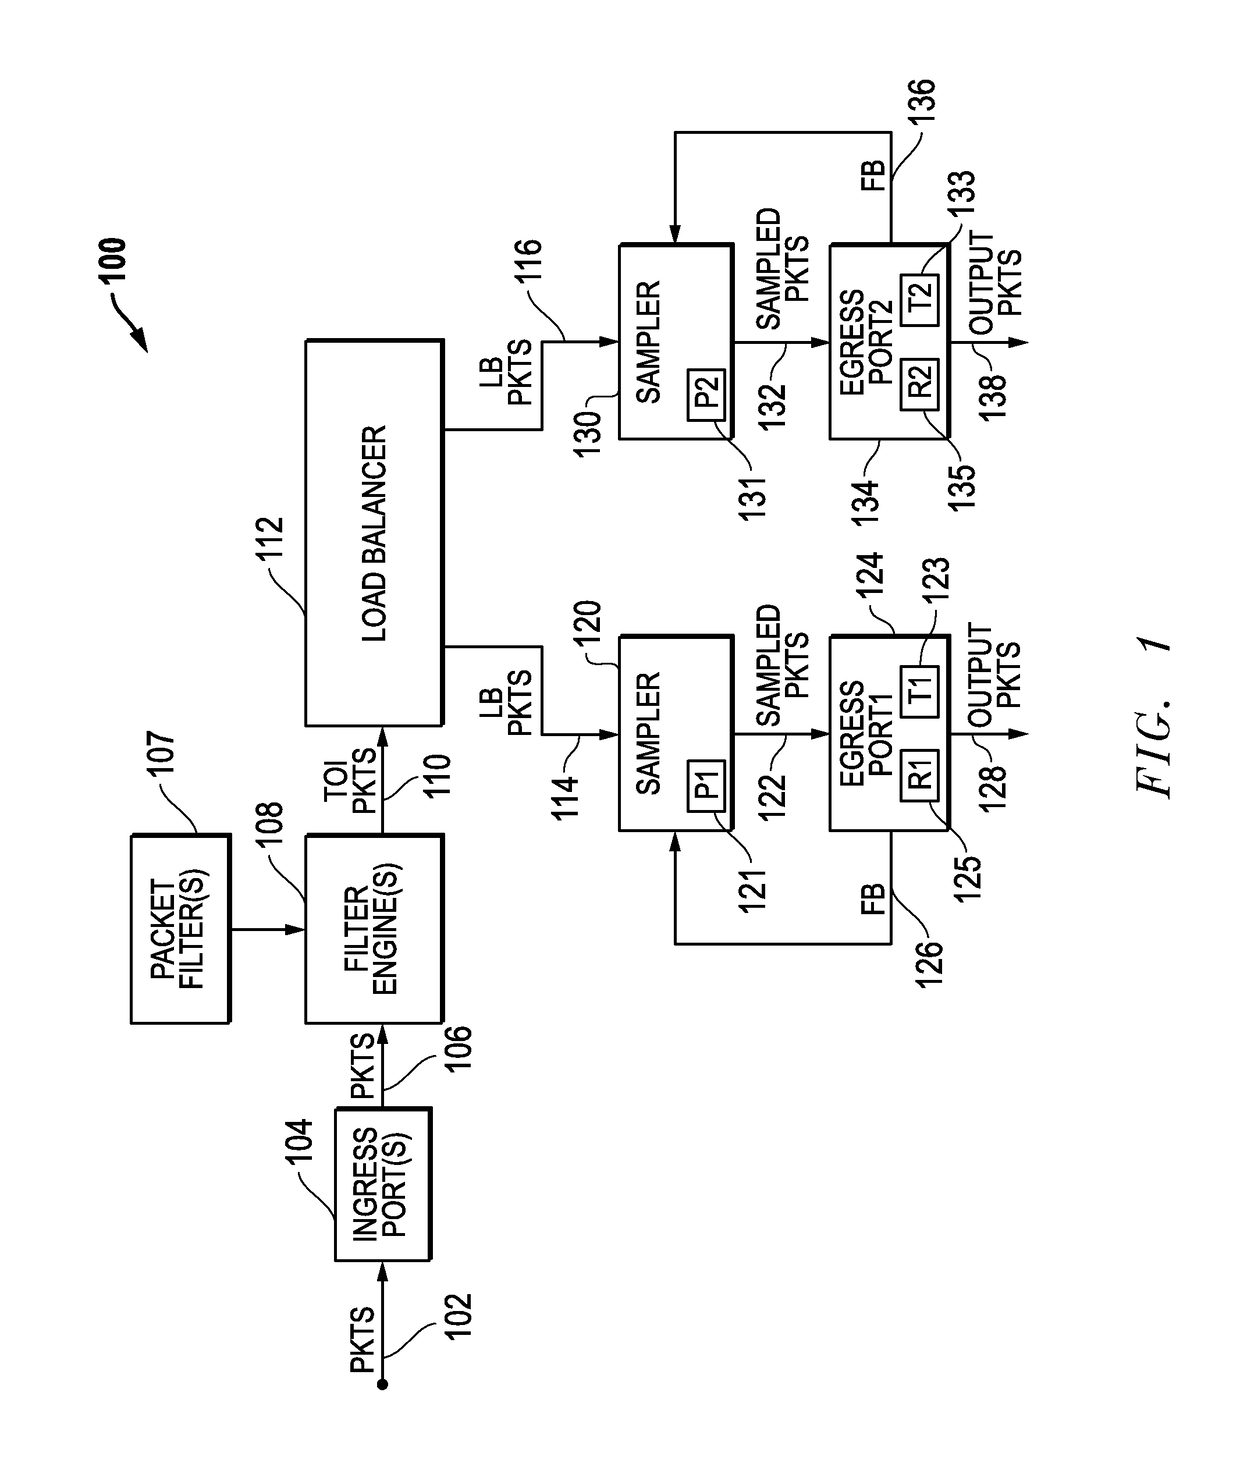 Egress port overload protection for network packet forwarding systems